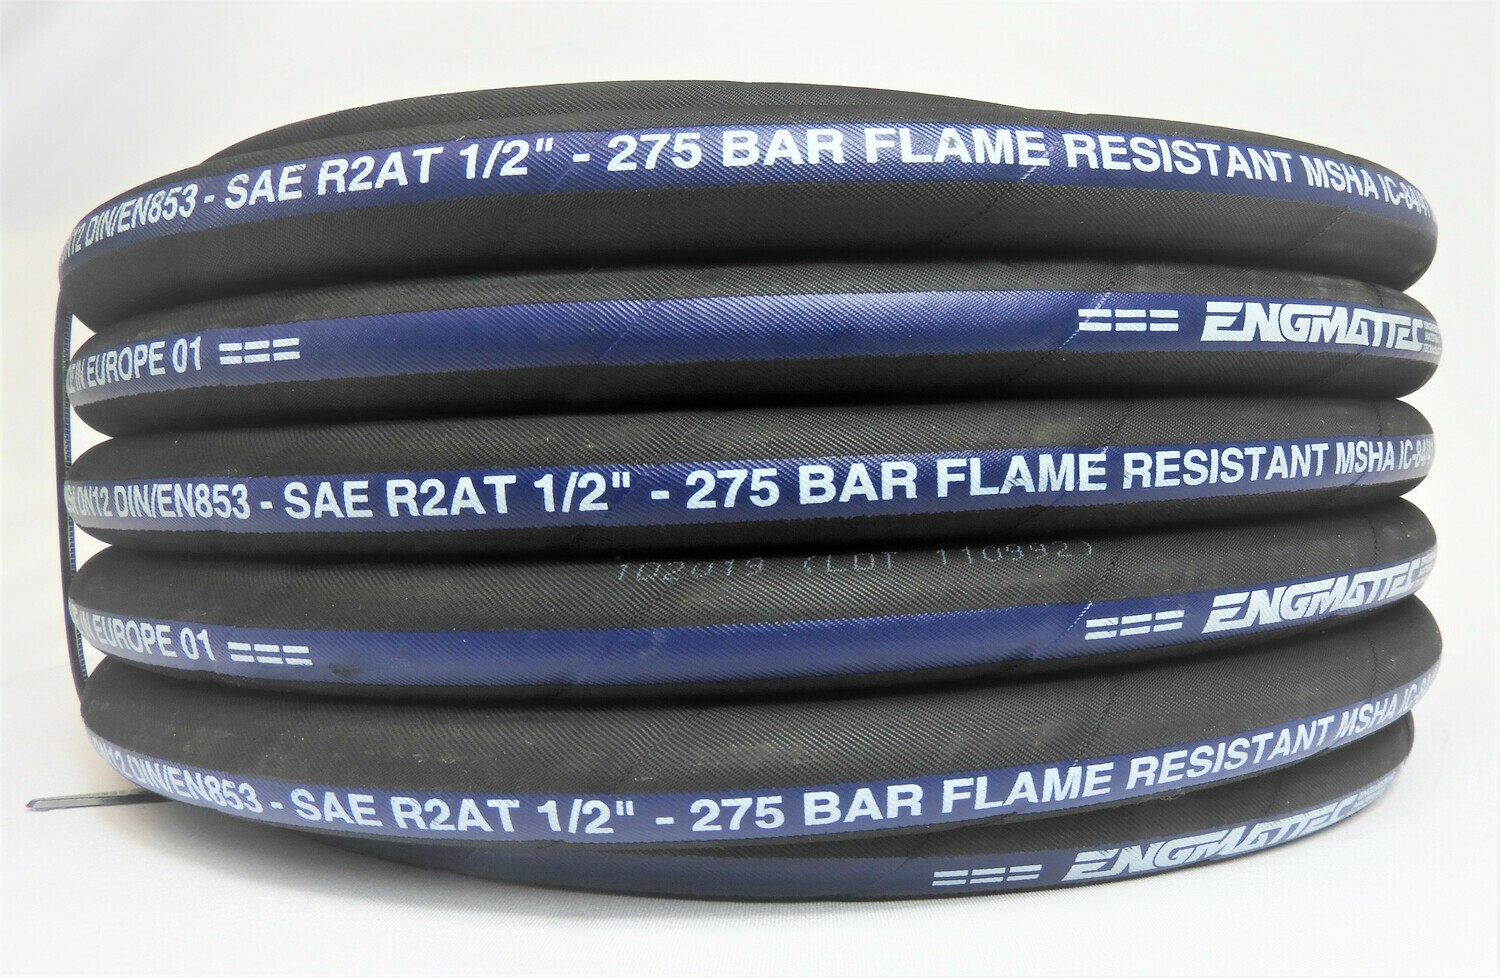 HYDRAULIC HOSE 2-50 FT ROLLS R2T06 3/8 SAE W.P PSI 4800 2WIRE FREE SHIPPING 